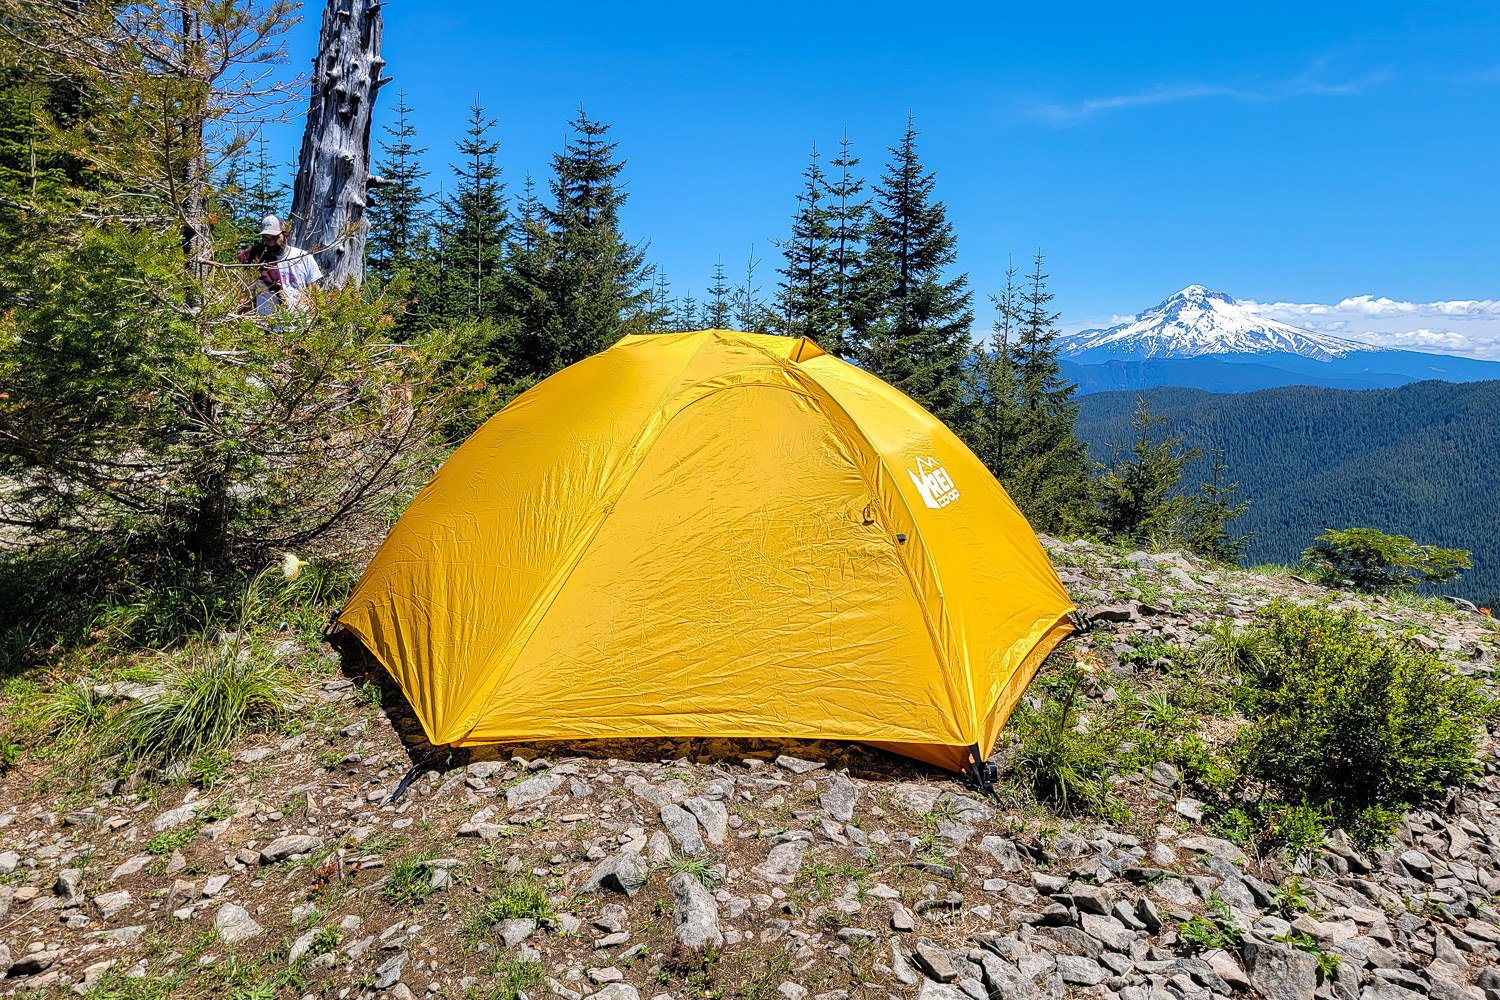 The REI Trailmade 2 tent with its rain fly on pitched on a ridge with a mountain in the background